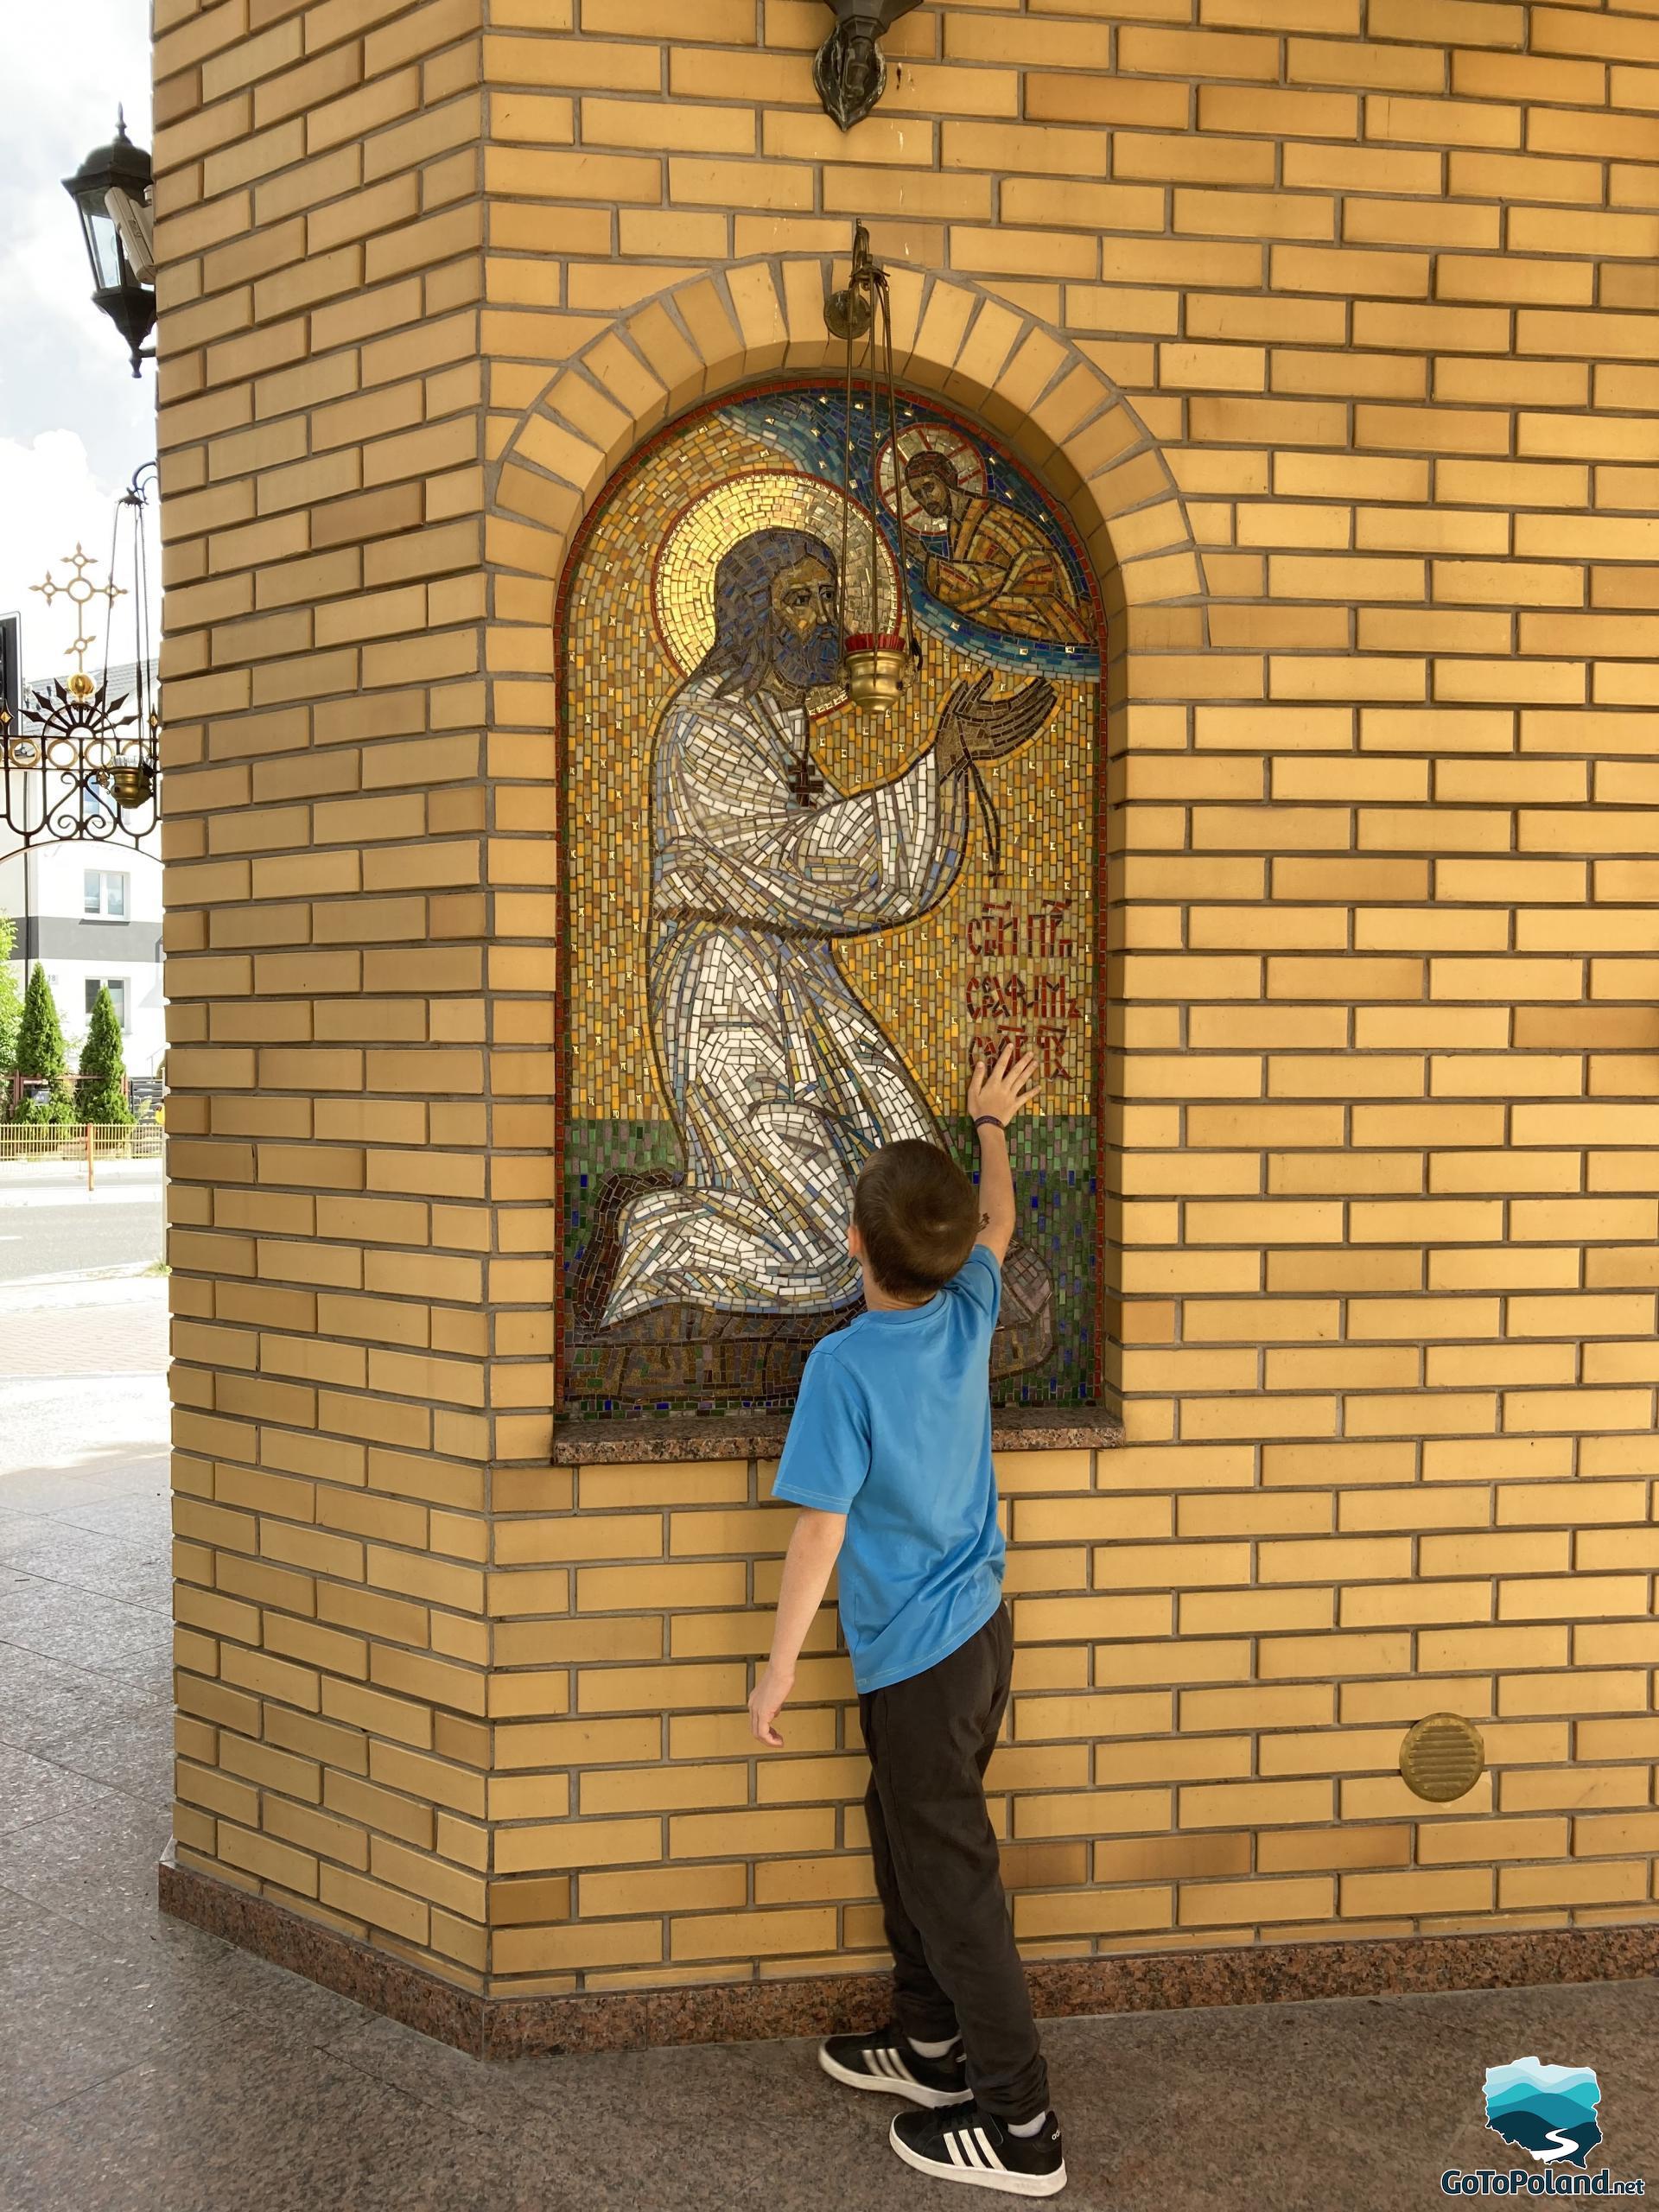 the boy is standing by the image of christ, which is placed in a rectangular pillar made of bricks